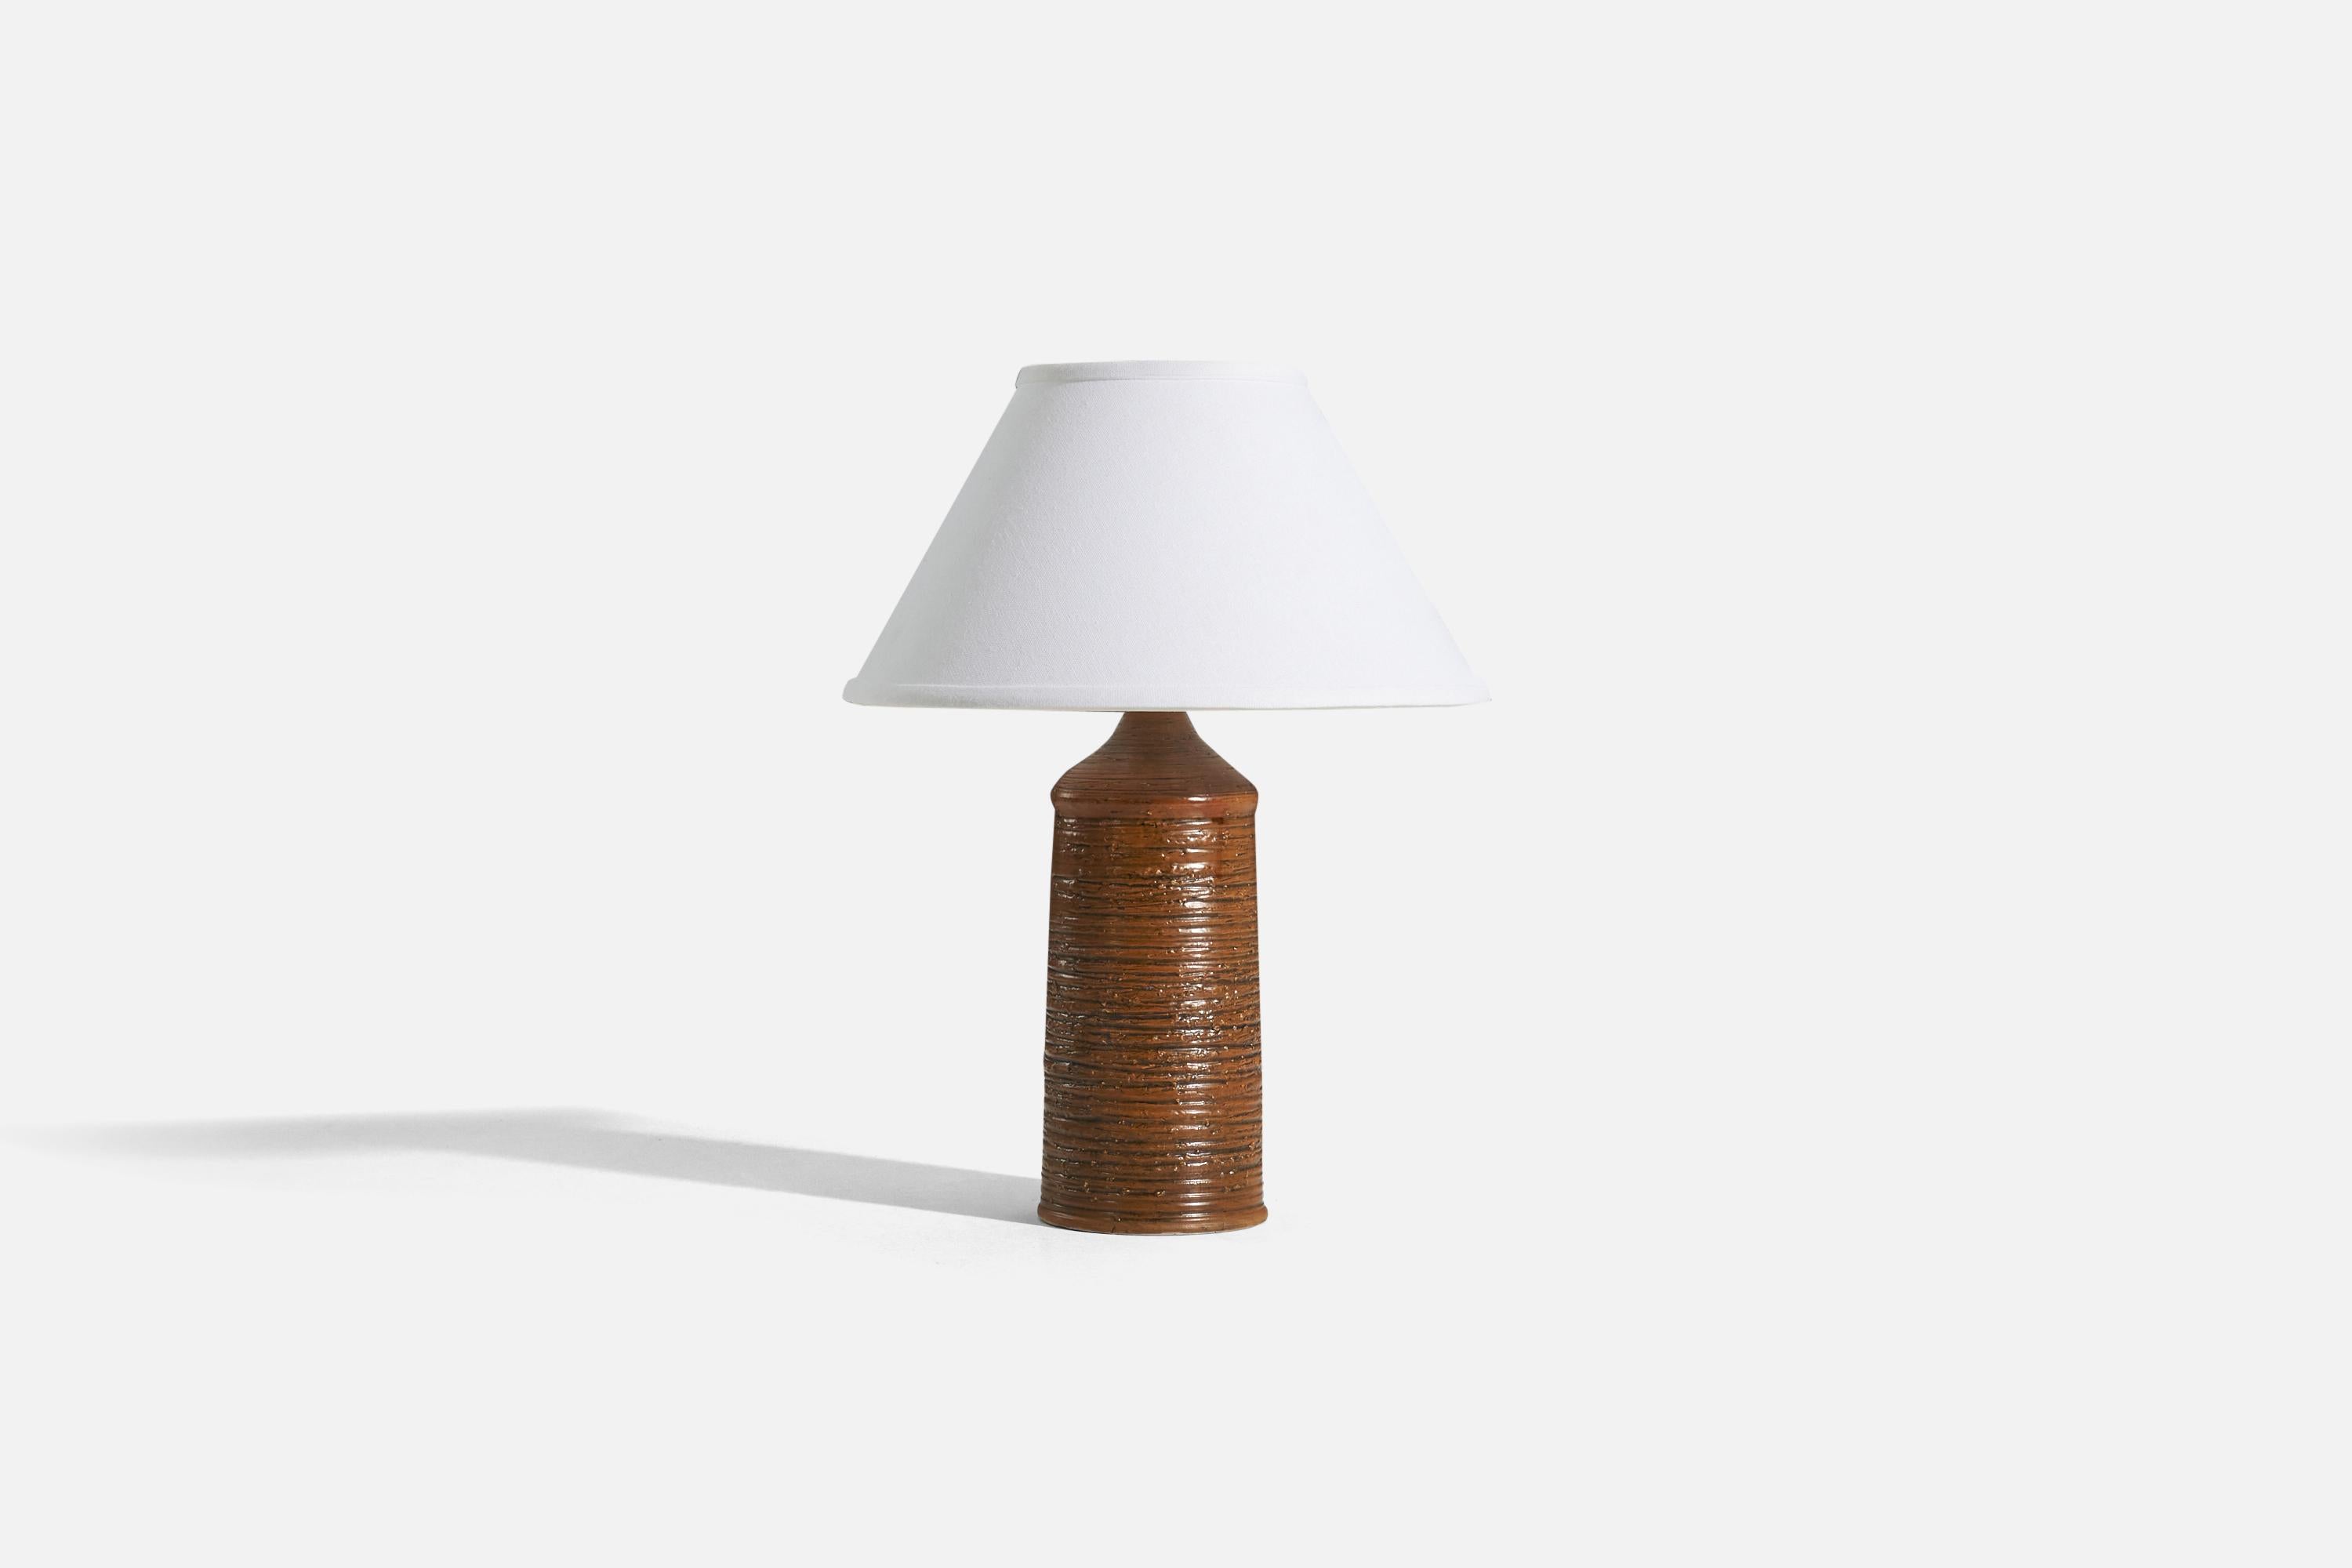 A brown-glazed stoneware table lamp designed by Olof Georg Hermansson (1915-1988) and produced for his own studio 